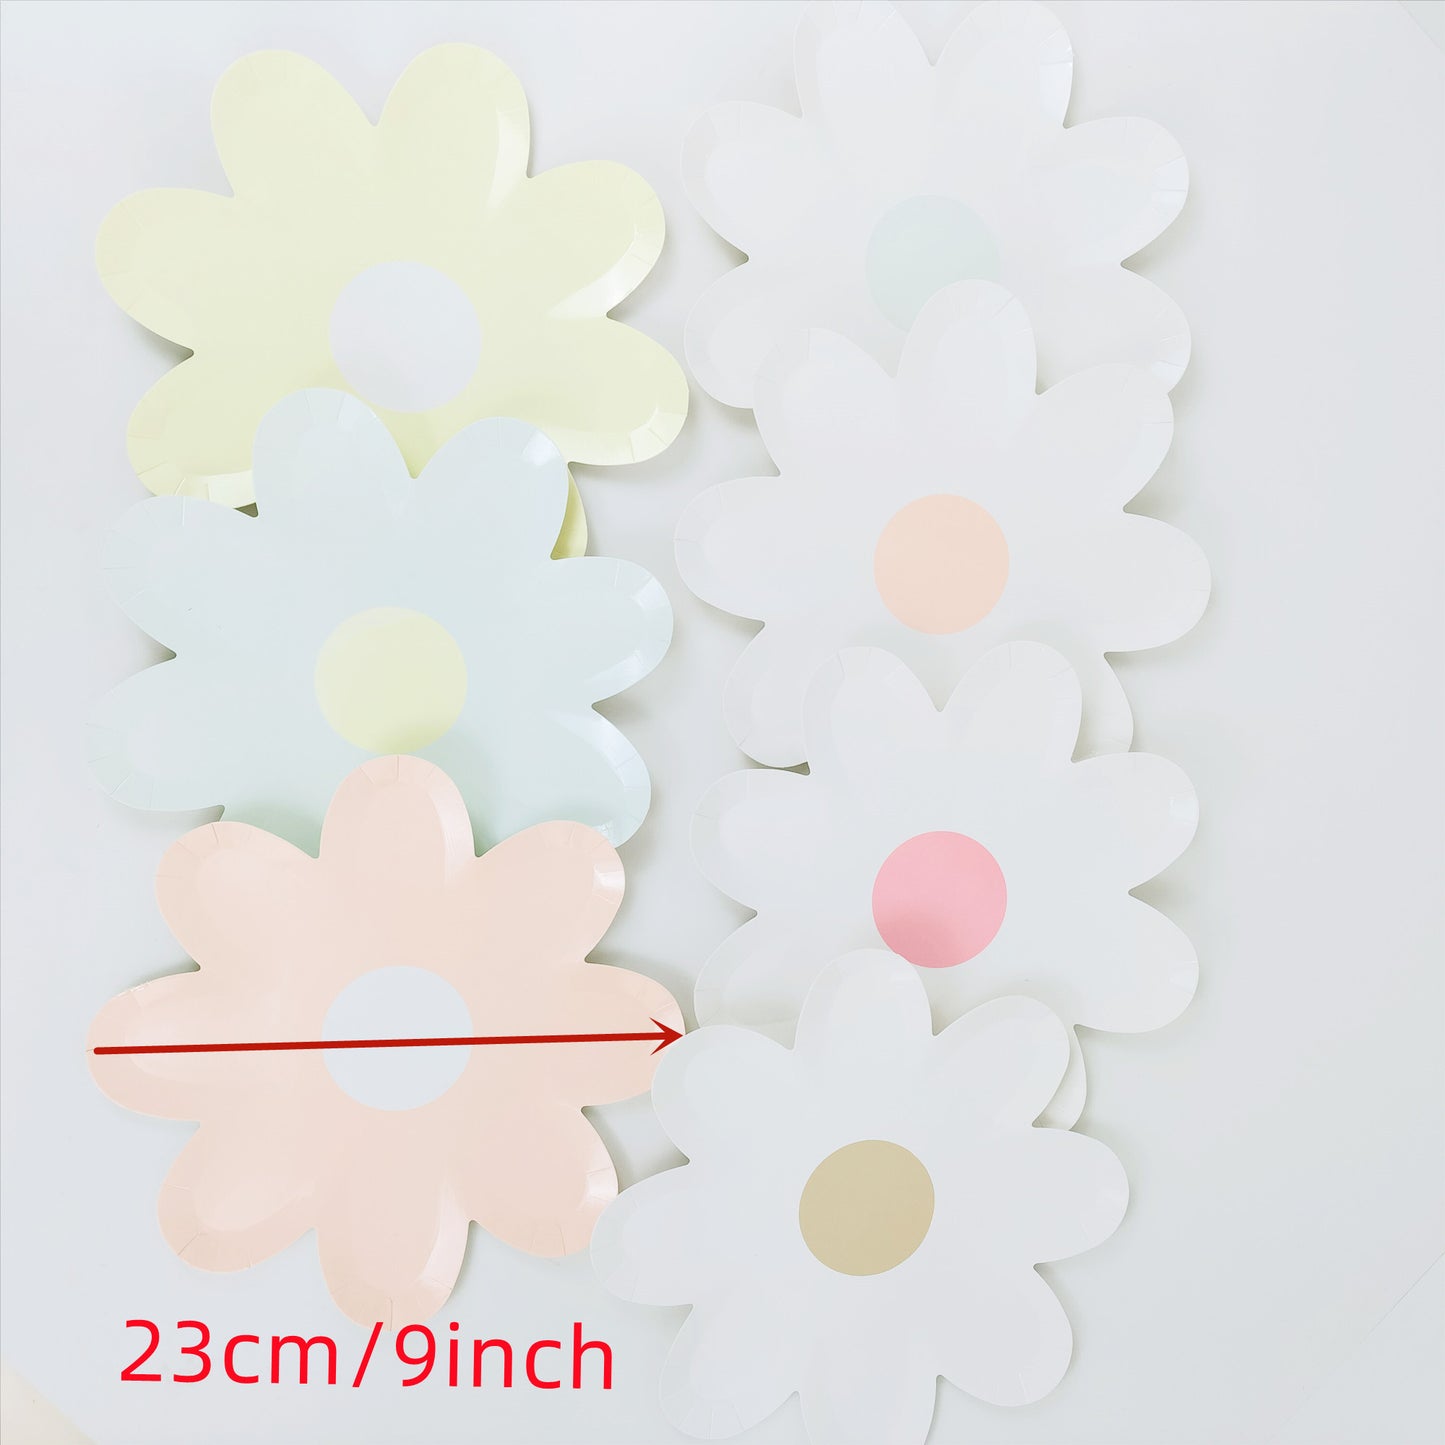 5/9 inch Floral Garden Paper Plate Disposable Tableware set Dessert Plate for Birthday Party Valentine's Day Weddings